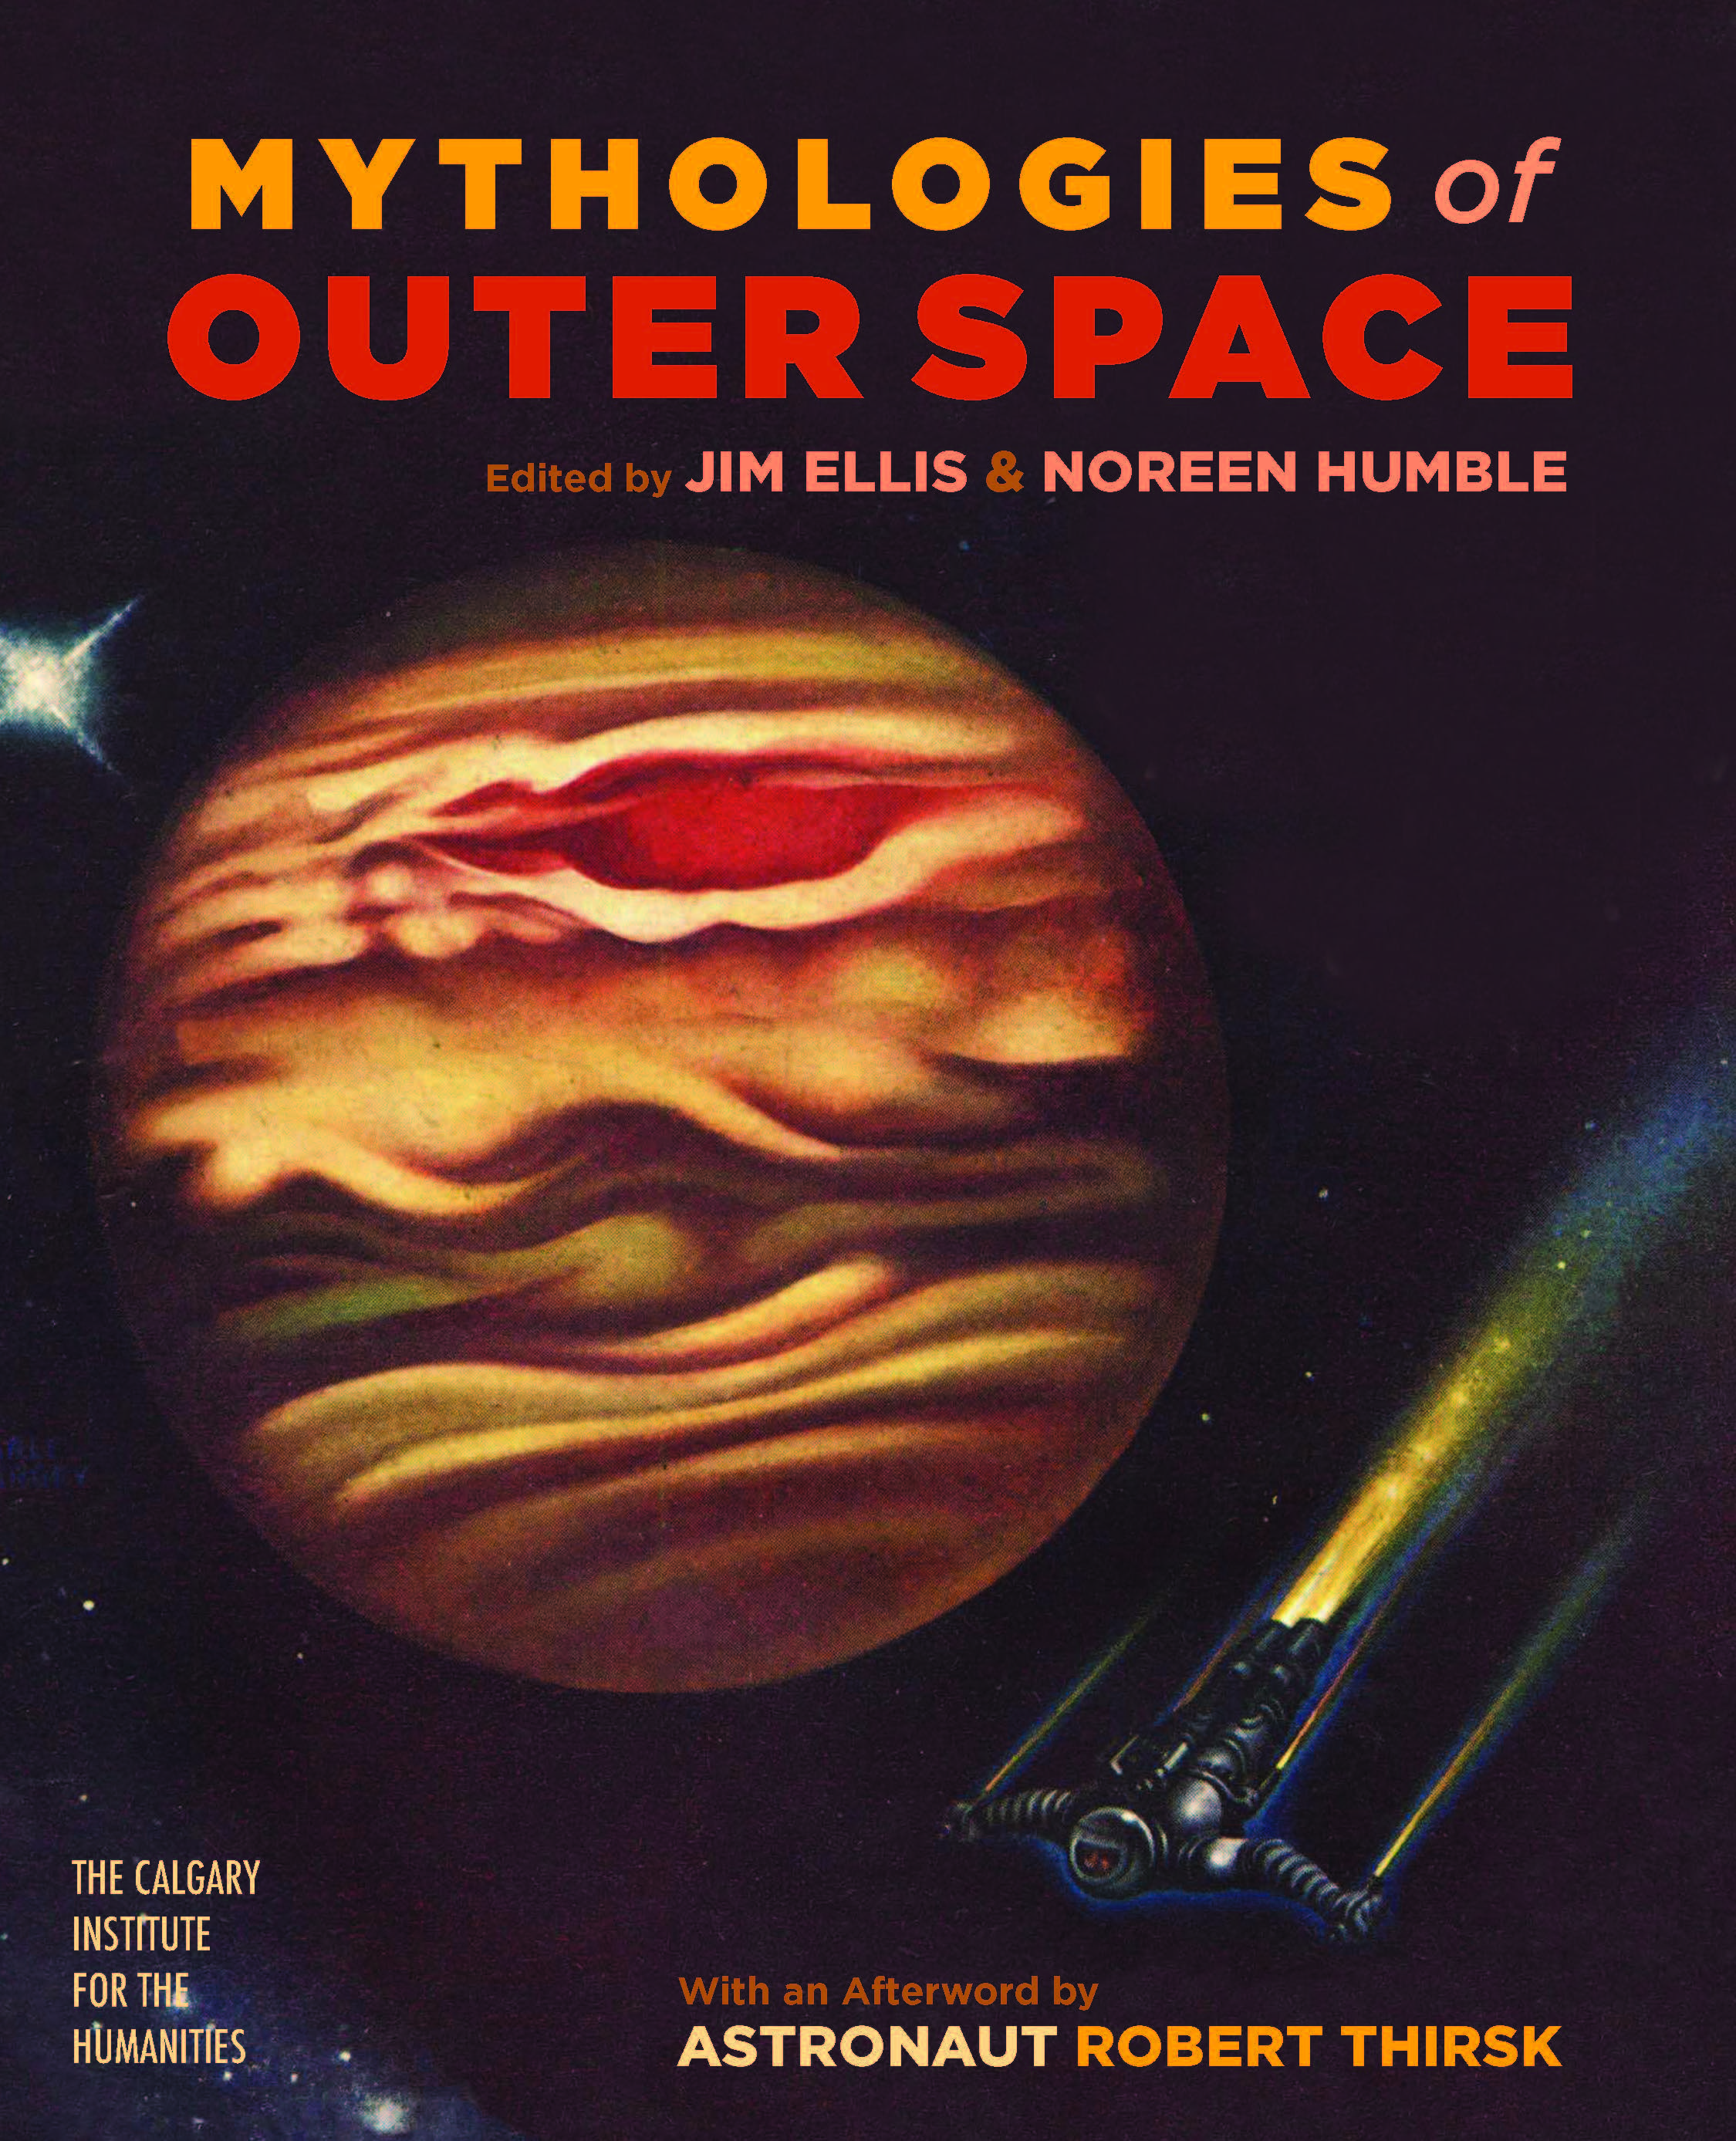 image of the book cover of Mythologies of Outer Space